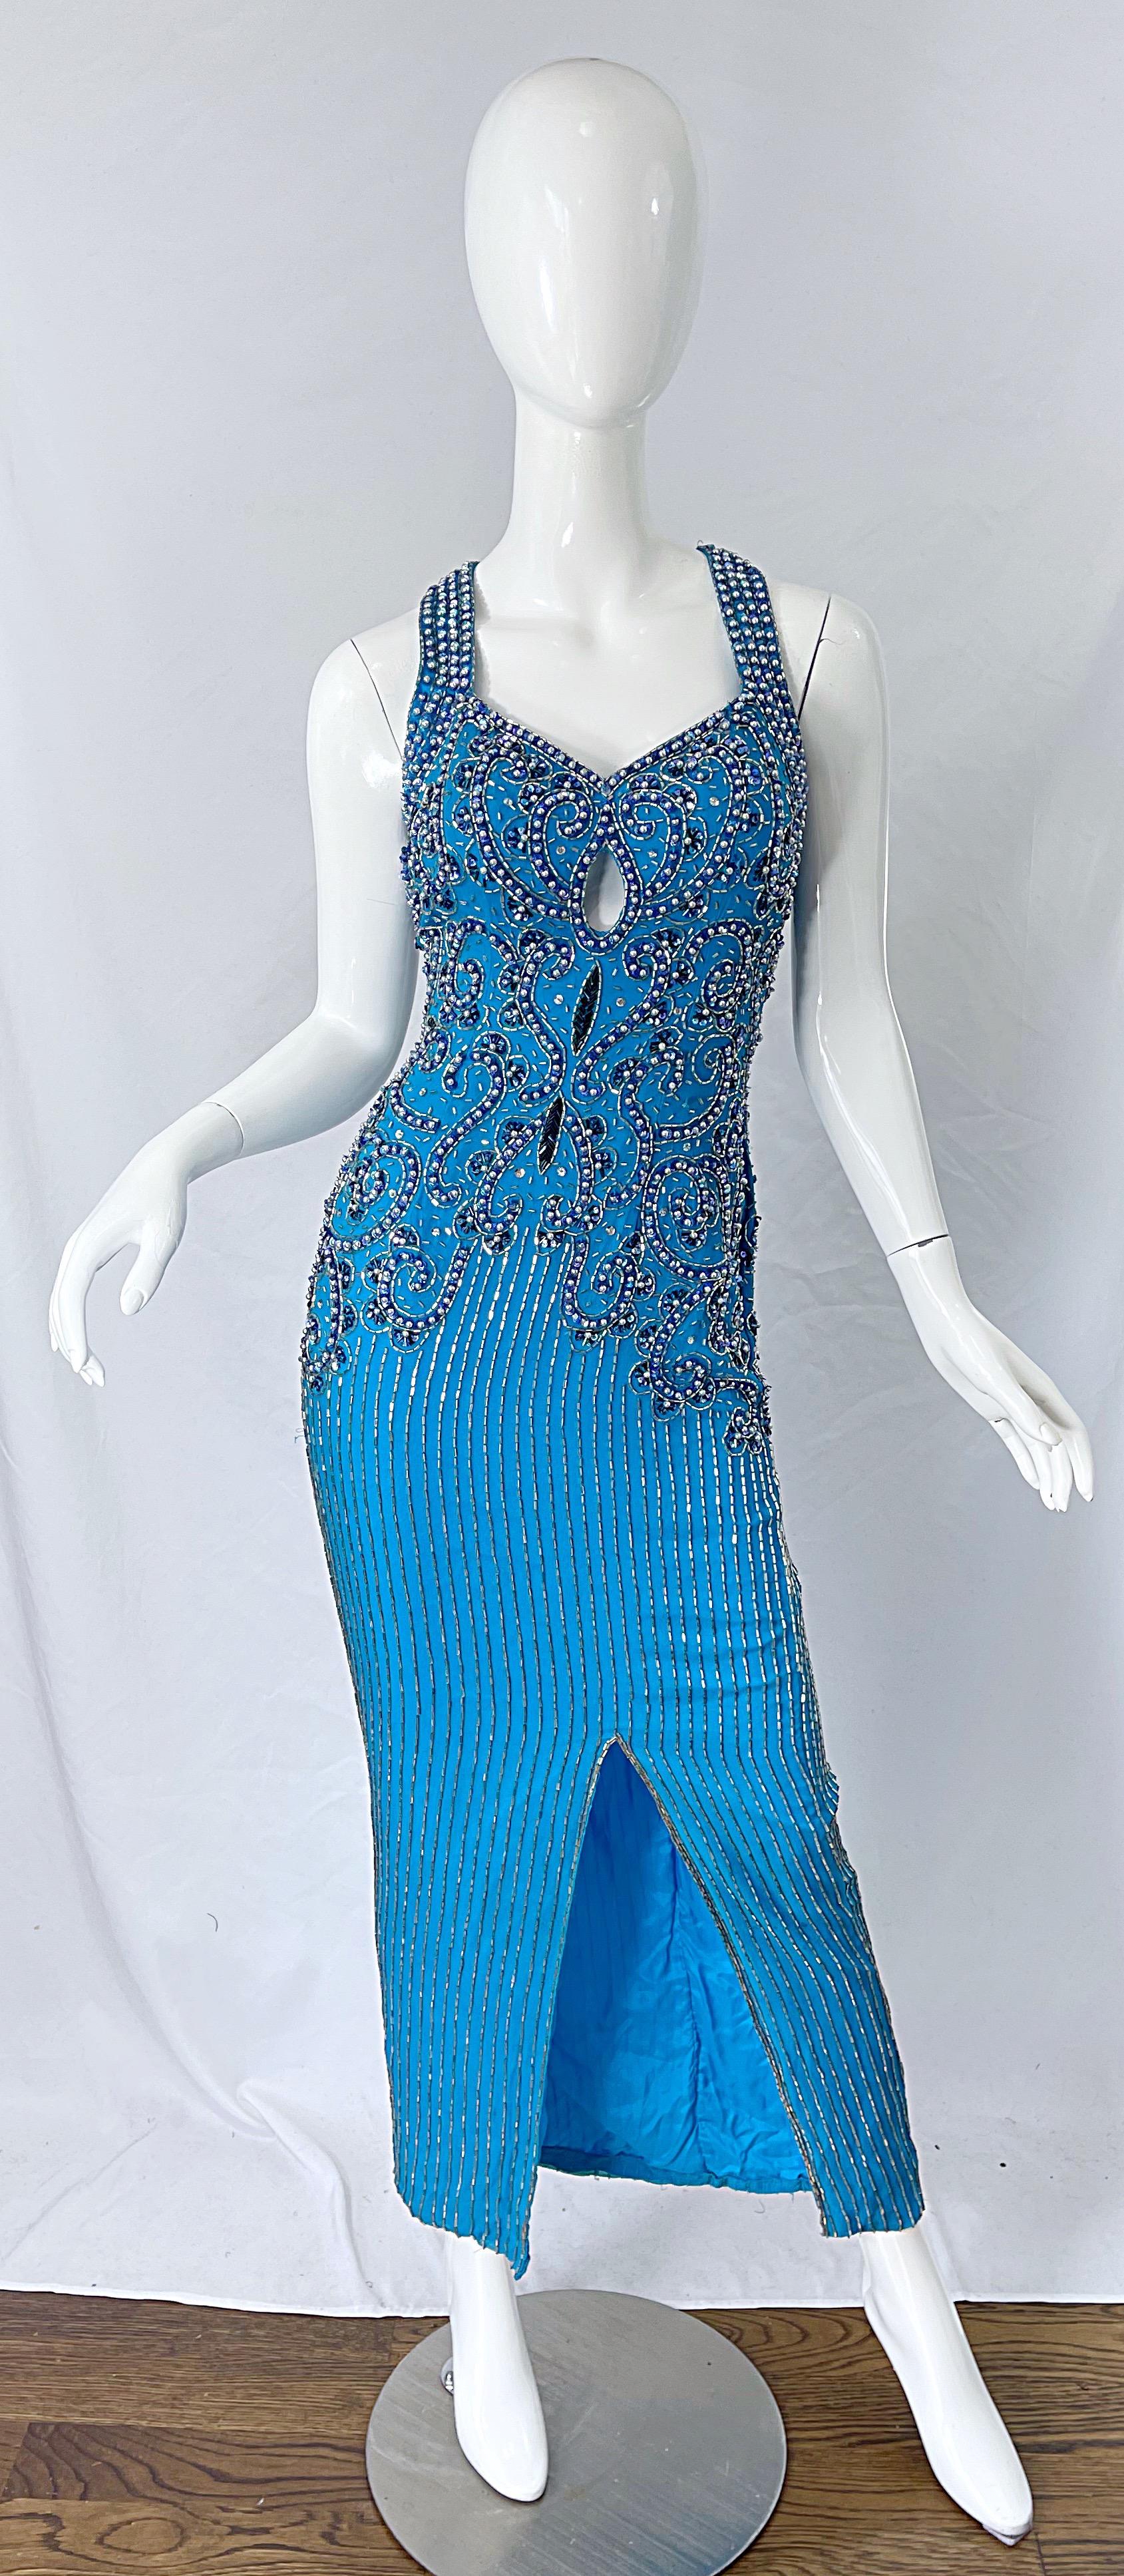 Beautiful early 1990s TED LAPIDUS turquoise blue silk beaded evening halter gown ! Features thousands of hand-sewn beads in silver and blue, sequins in blue and pearls throughout the entire dress. Peek-a-boo detail at center bust. Hidden zipper up